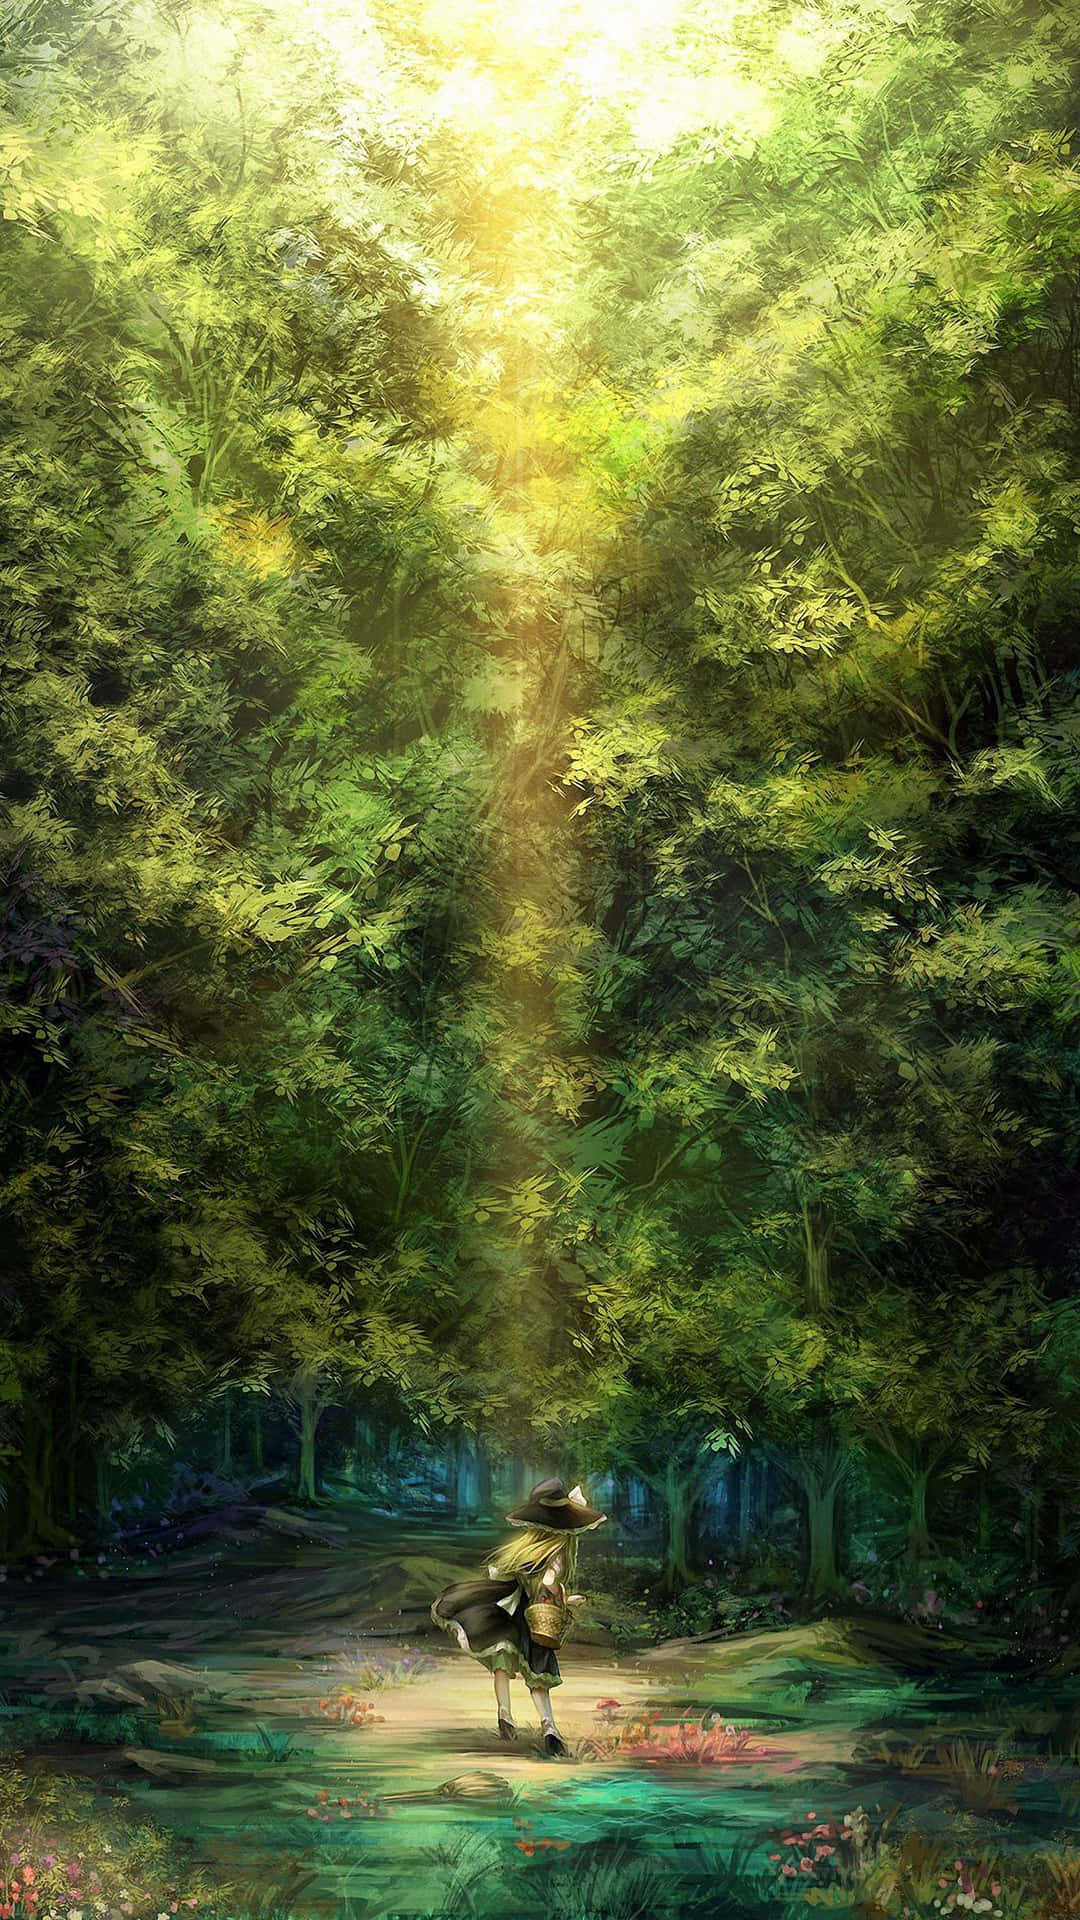 Journey through the stunning Anime Forest